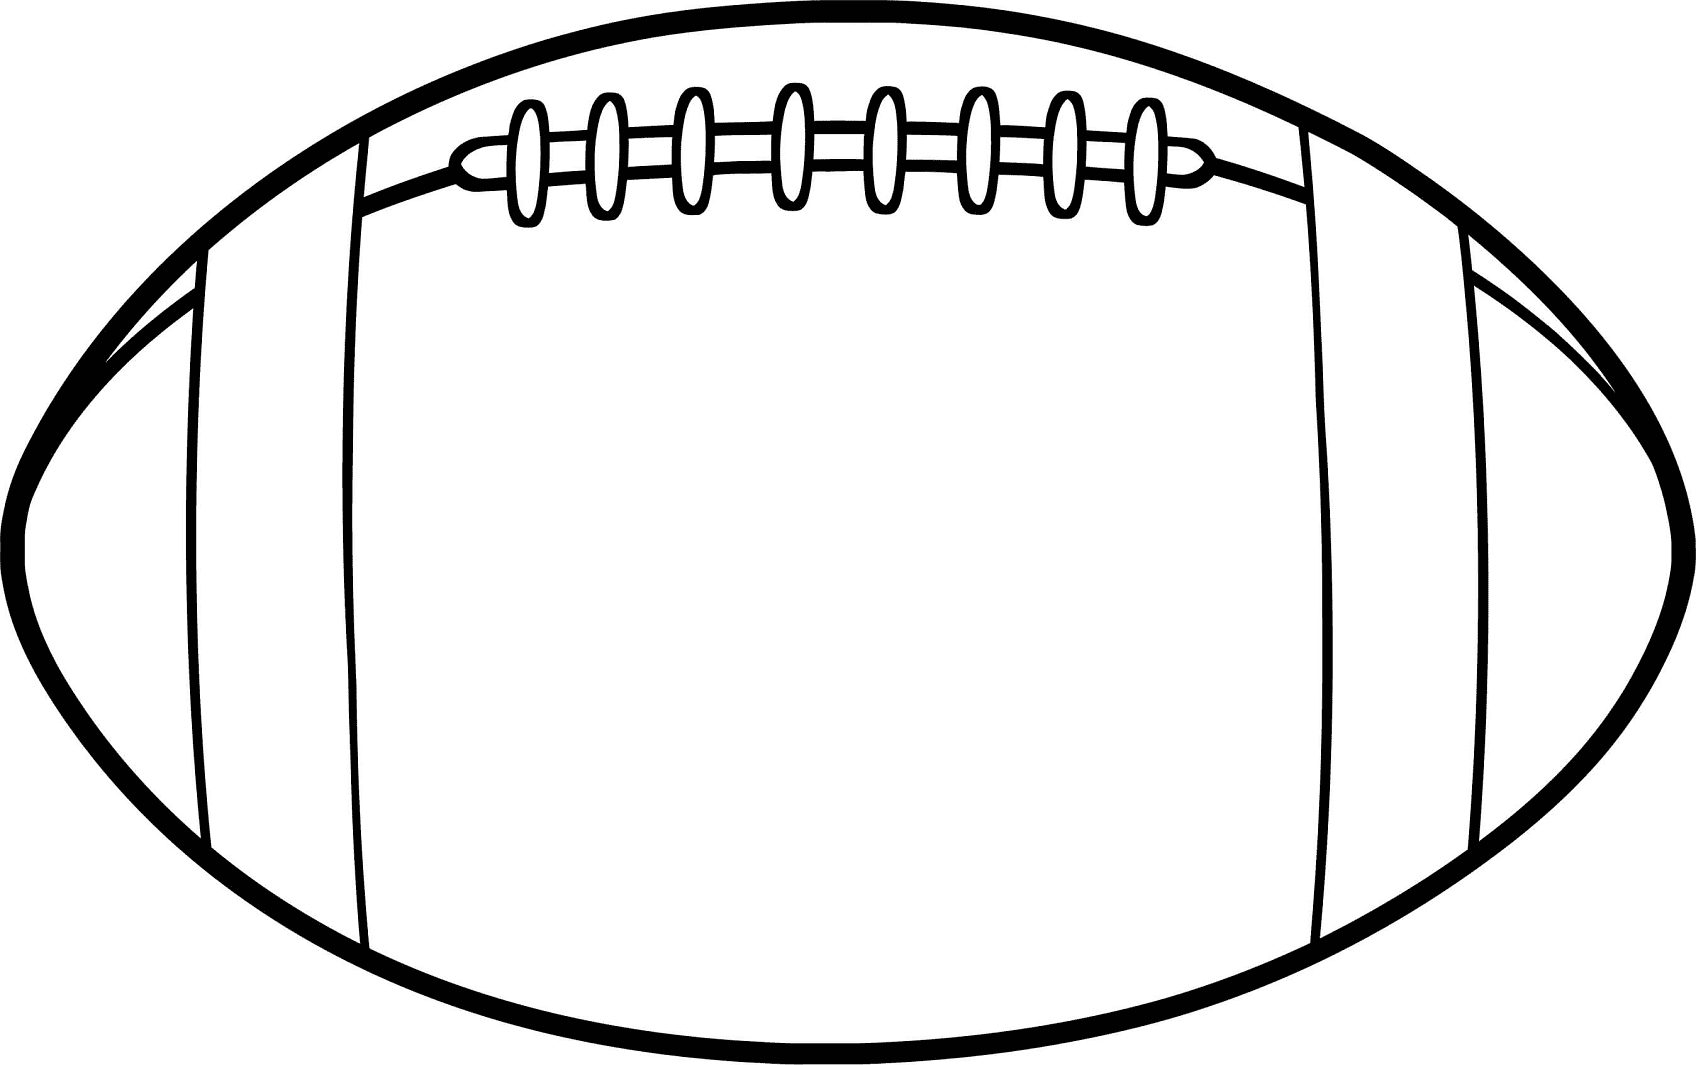 Cute Football Ball Coloring Page